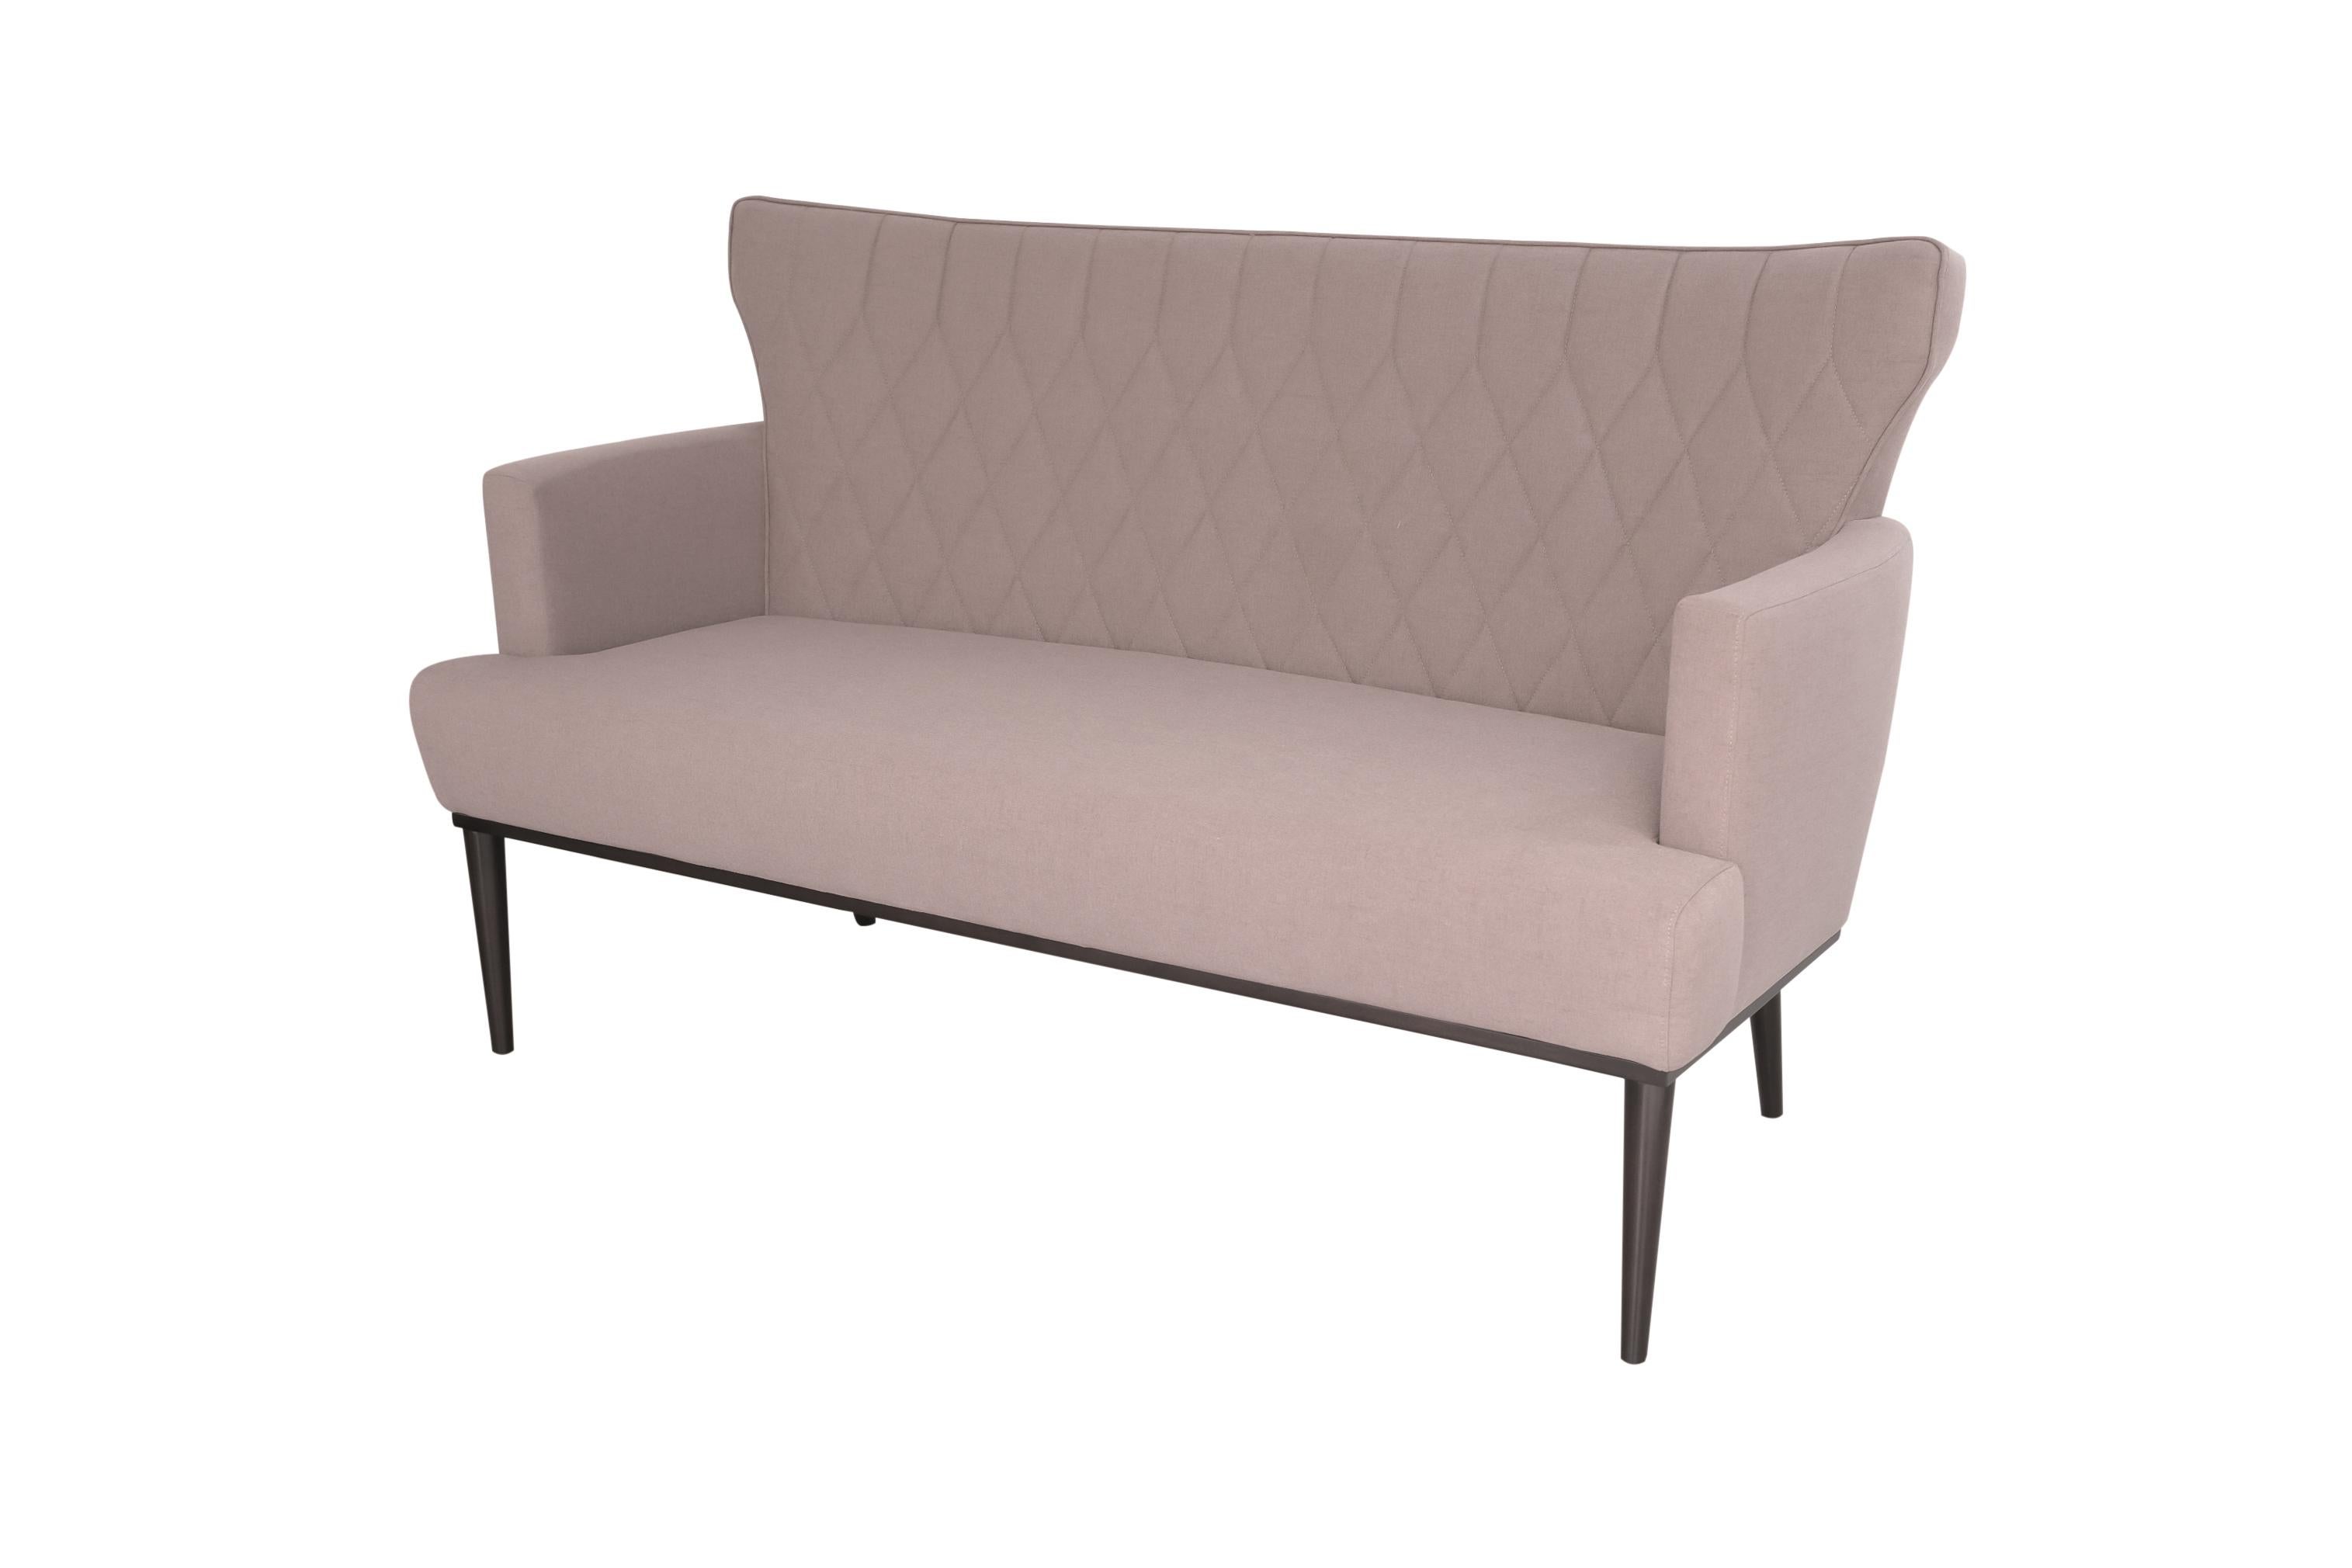 Sofa 2 seater with stitching detail on backrest In New Condition For Sale In Fiscal Amares, PT